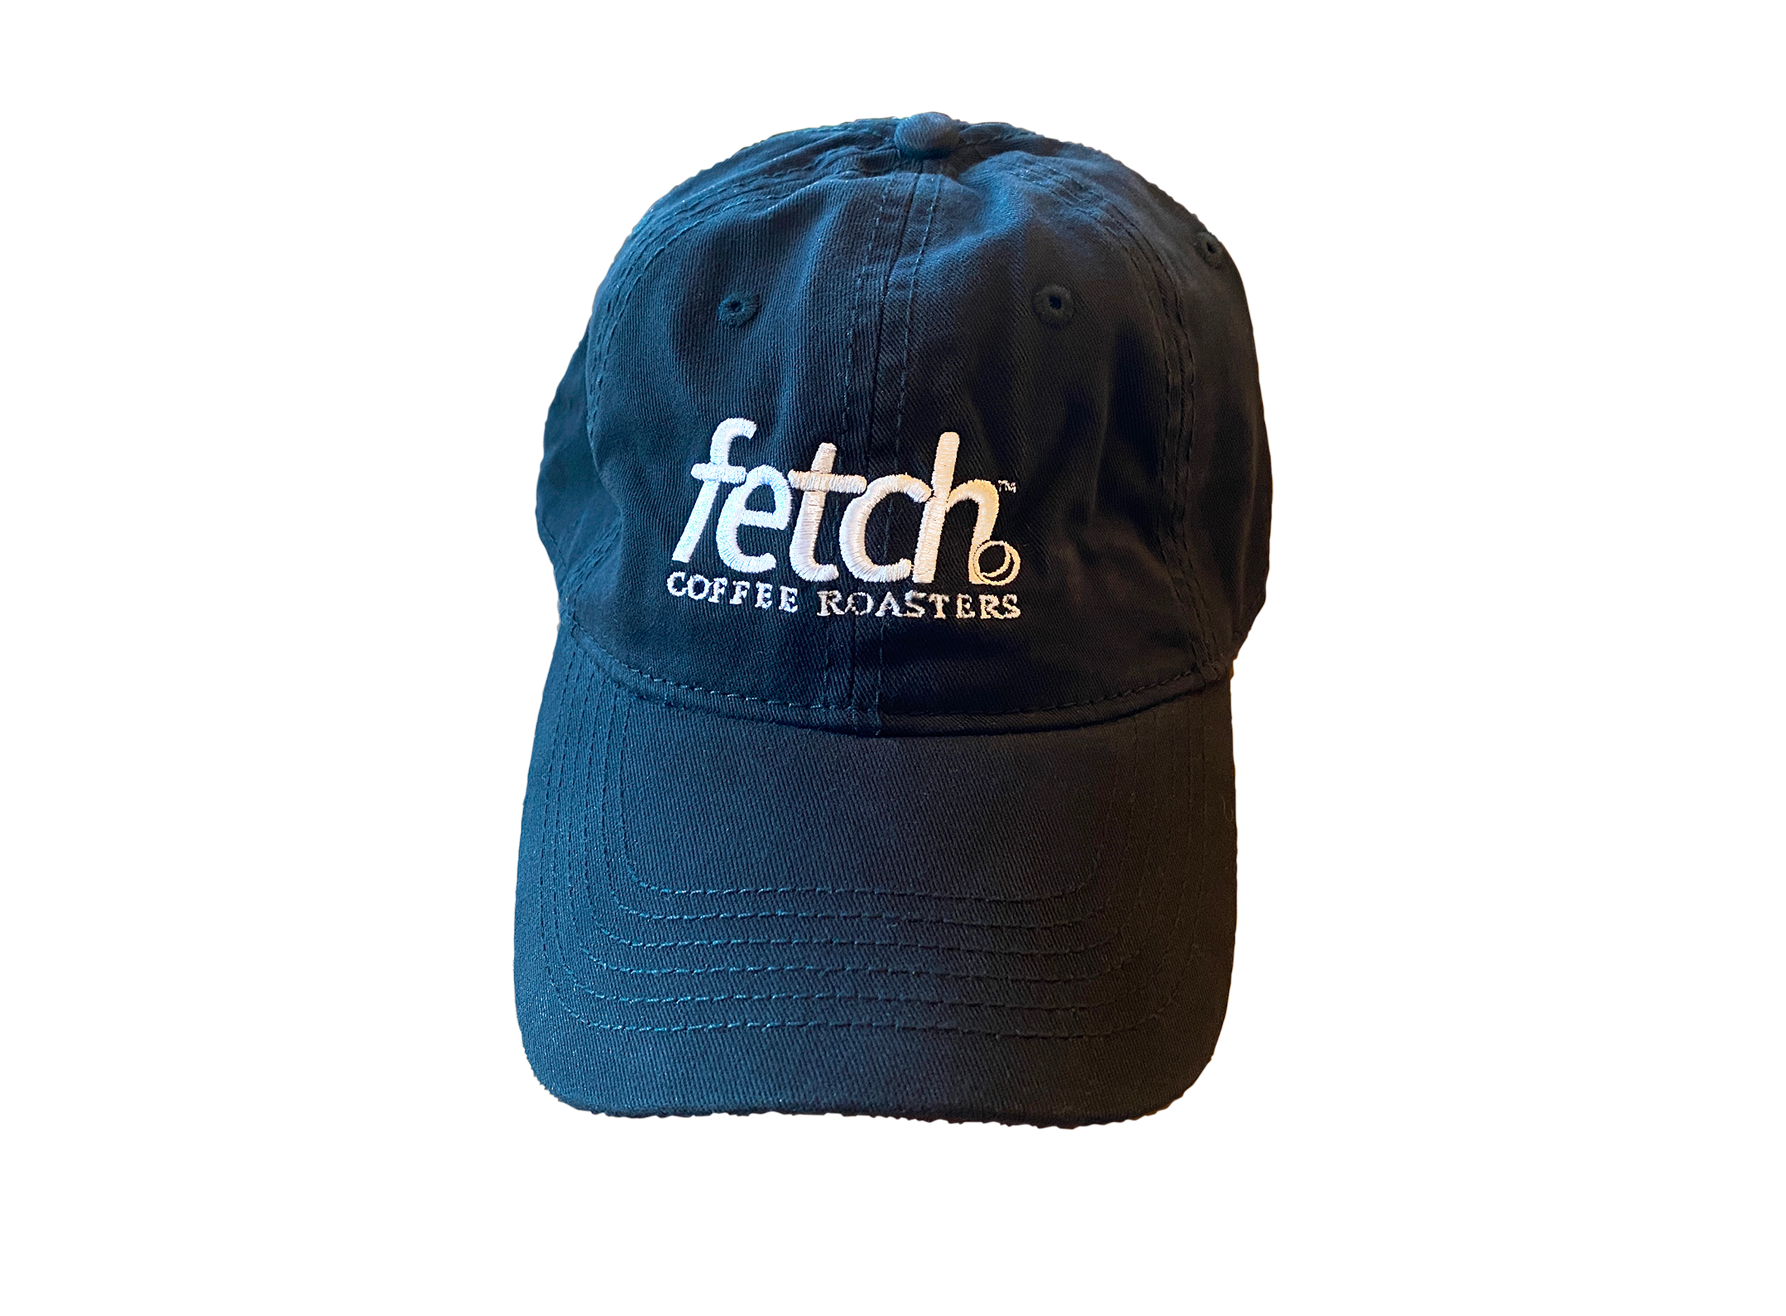 This black canvas hat is unsructured with the fetch logo embroidered on the front with white thread. The back has a metal clasp to adjust to most head sizes. 